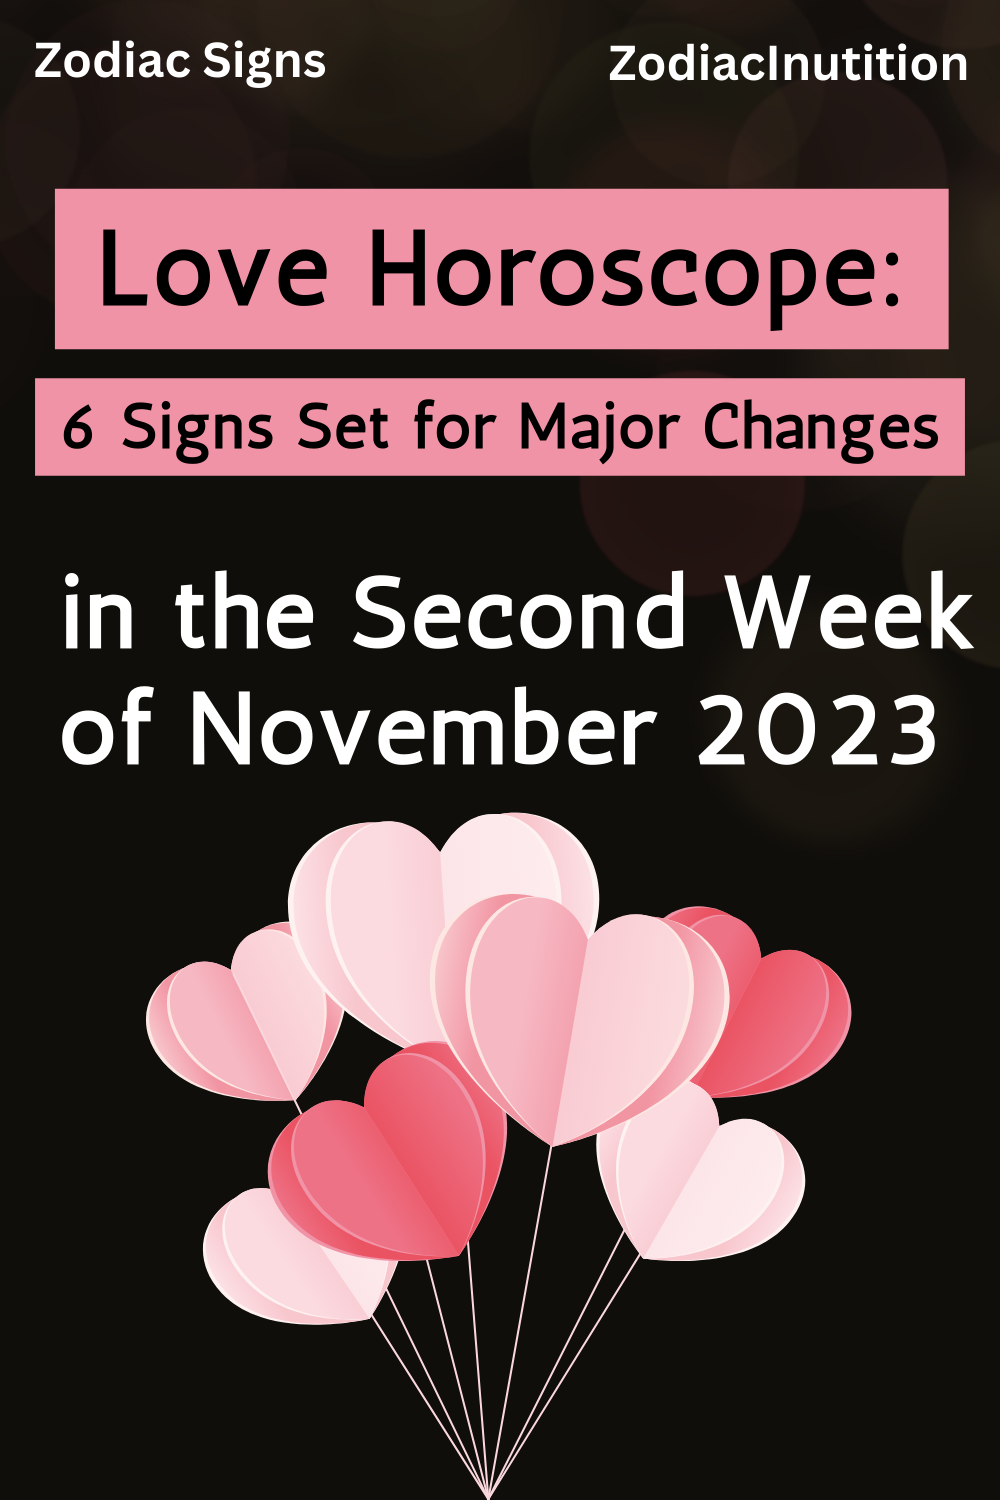 Love Horoscope: 6 Signs Set for Major Changes in the Second Week of November 2023